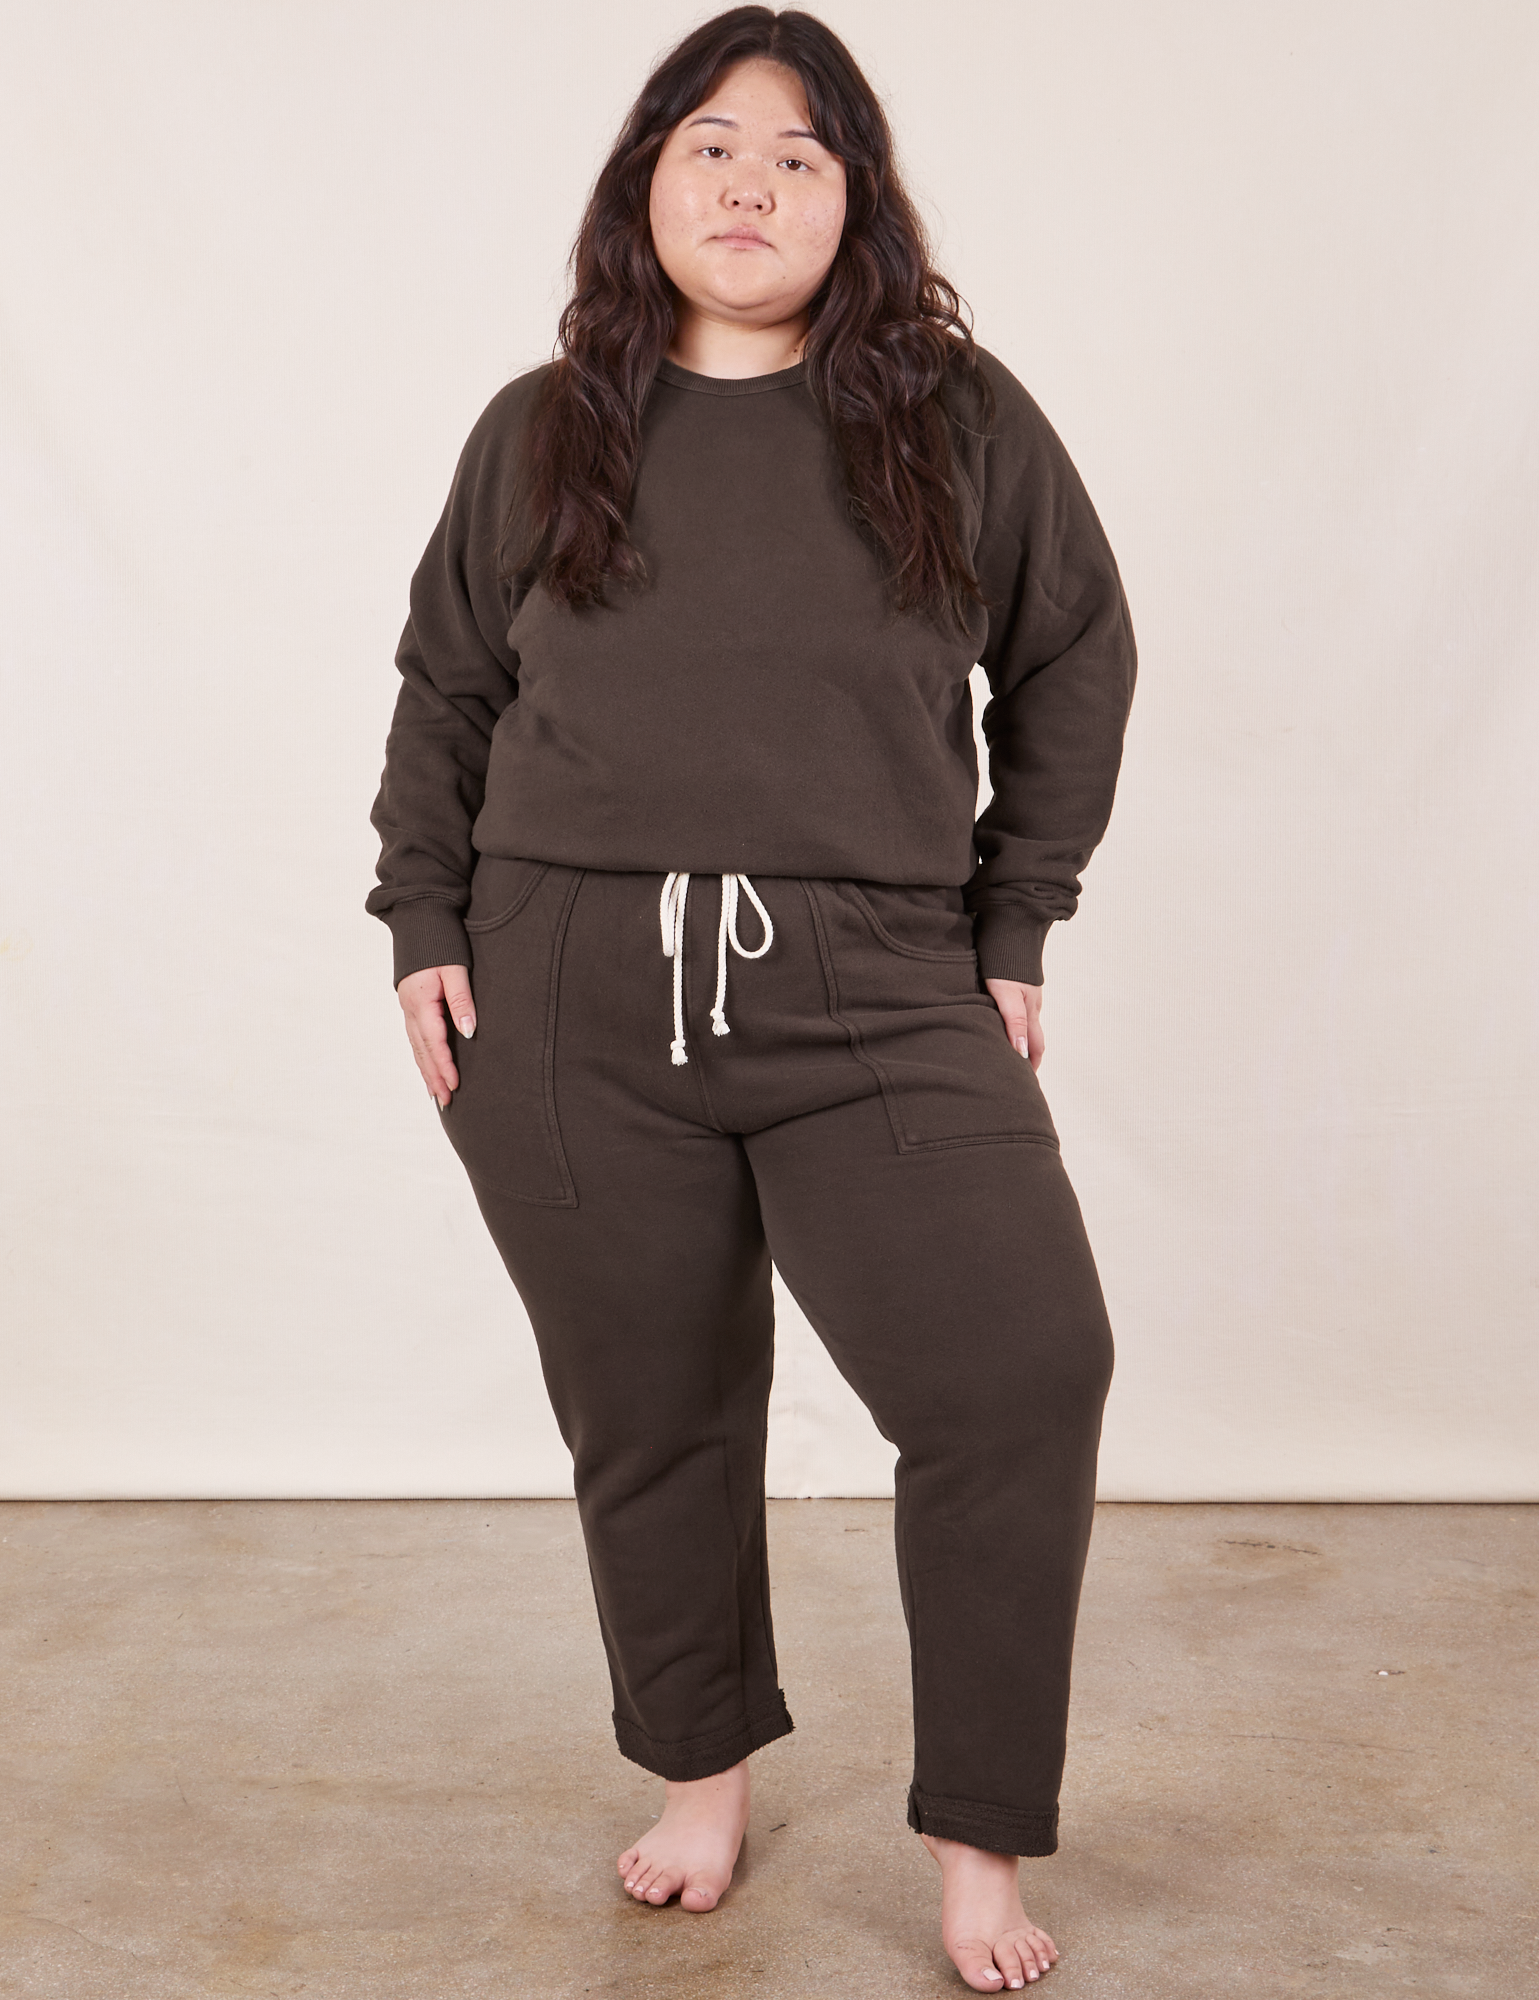 Ashley is wearing Cropped Rolled Cuff Sweatpants in Espresso Brown and matching Heavyweight Crew Sweatshirt